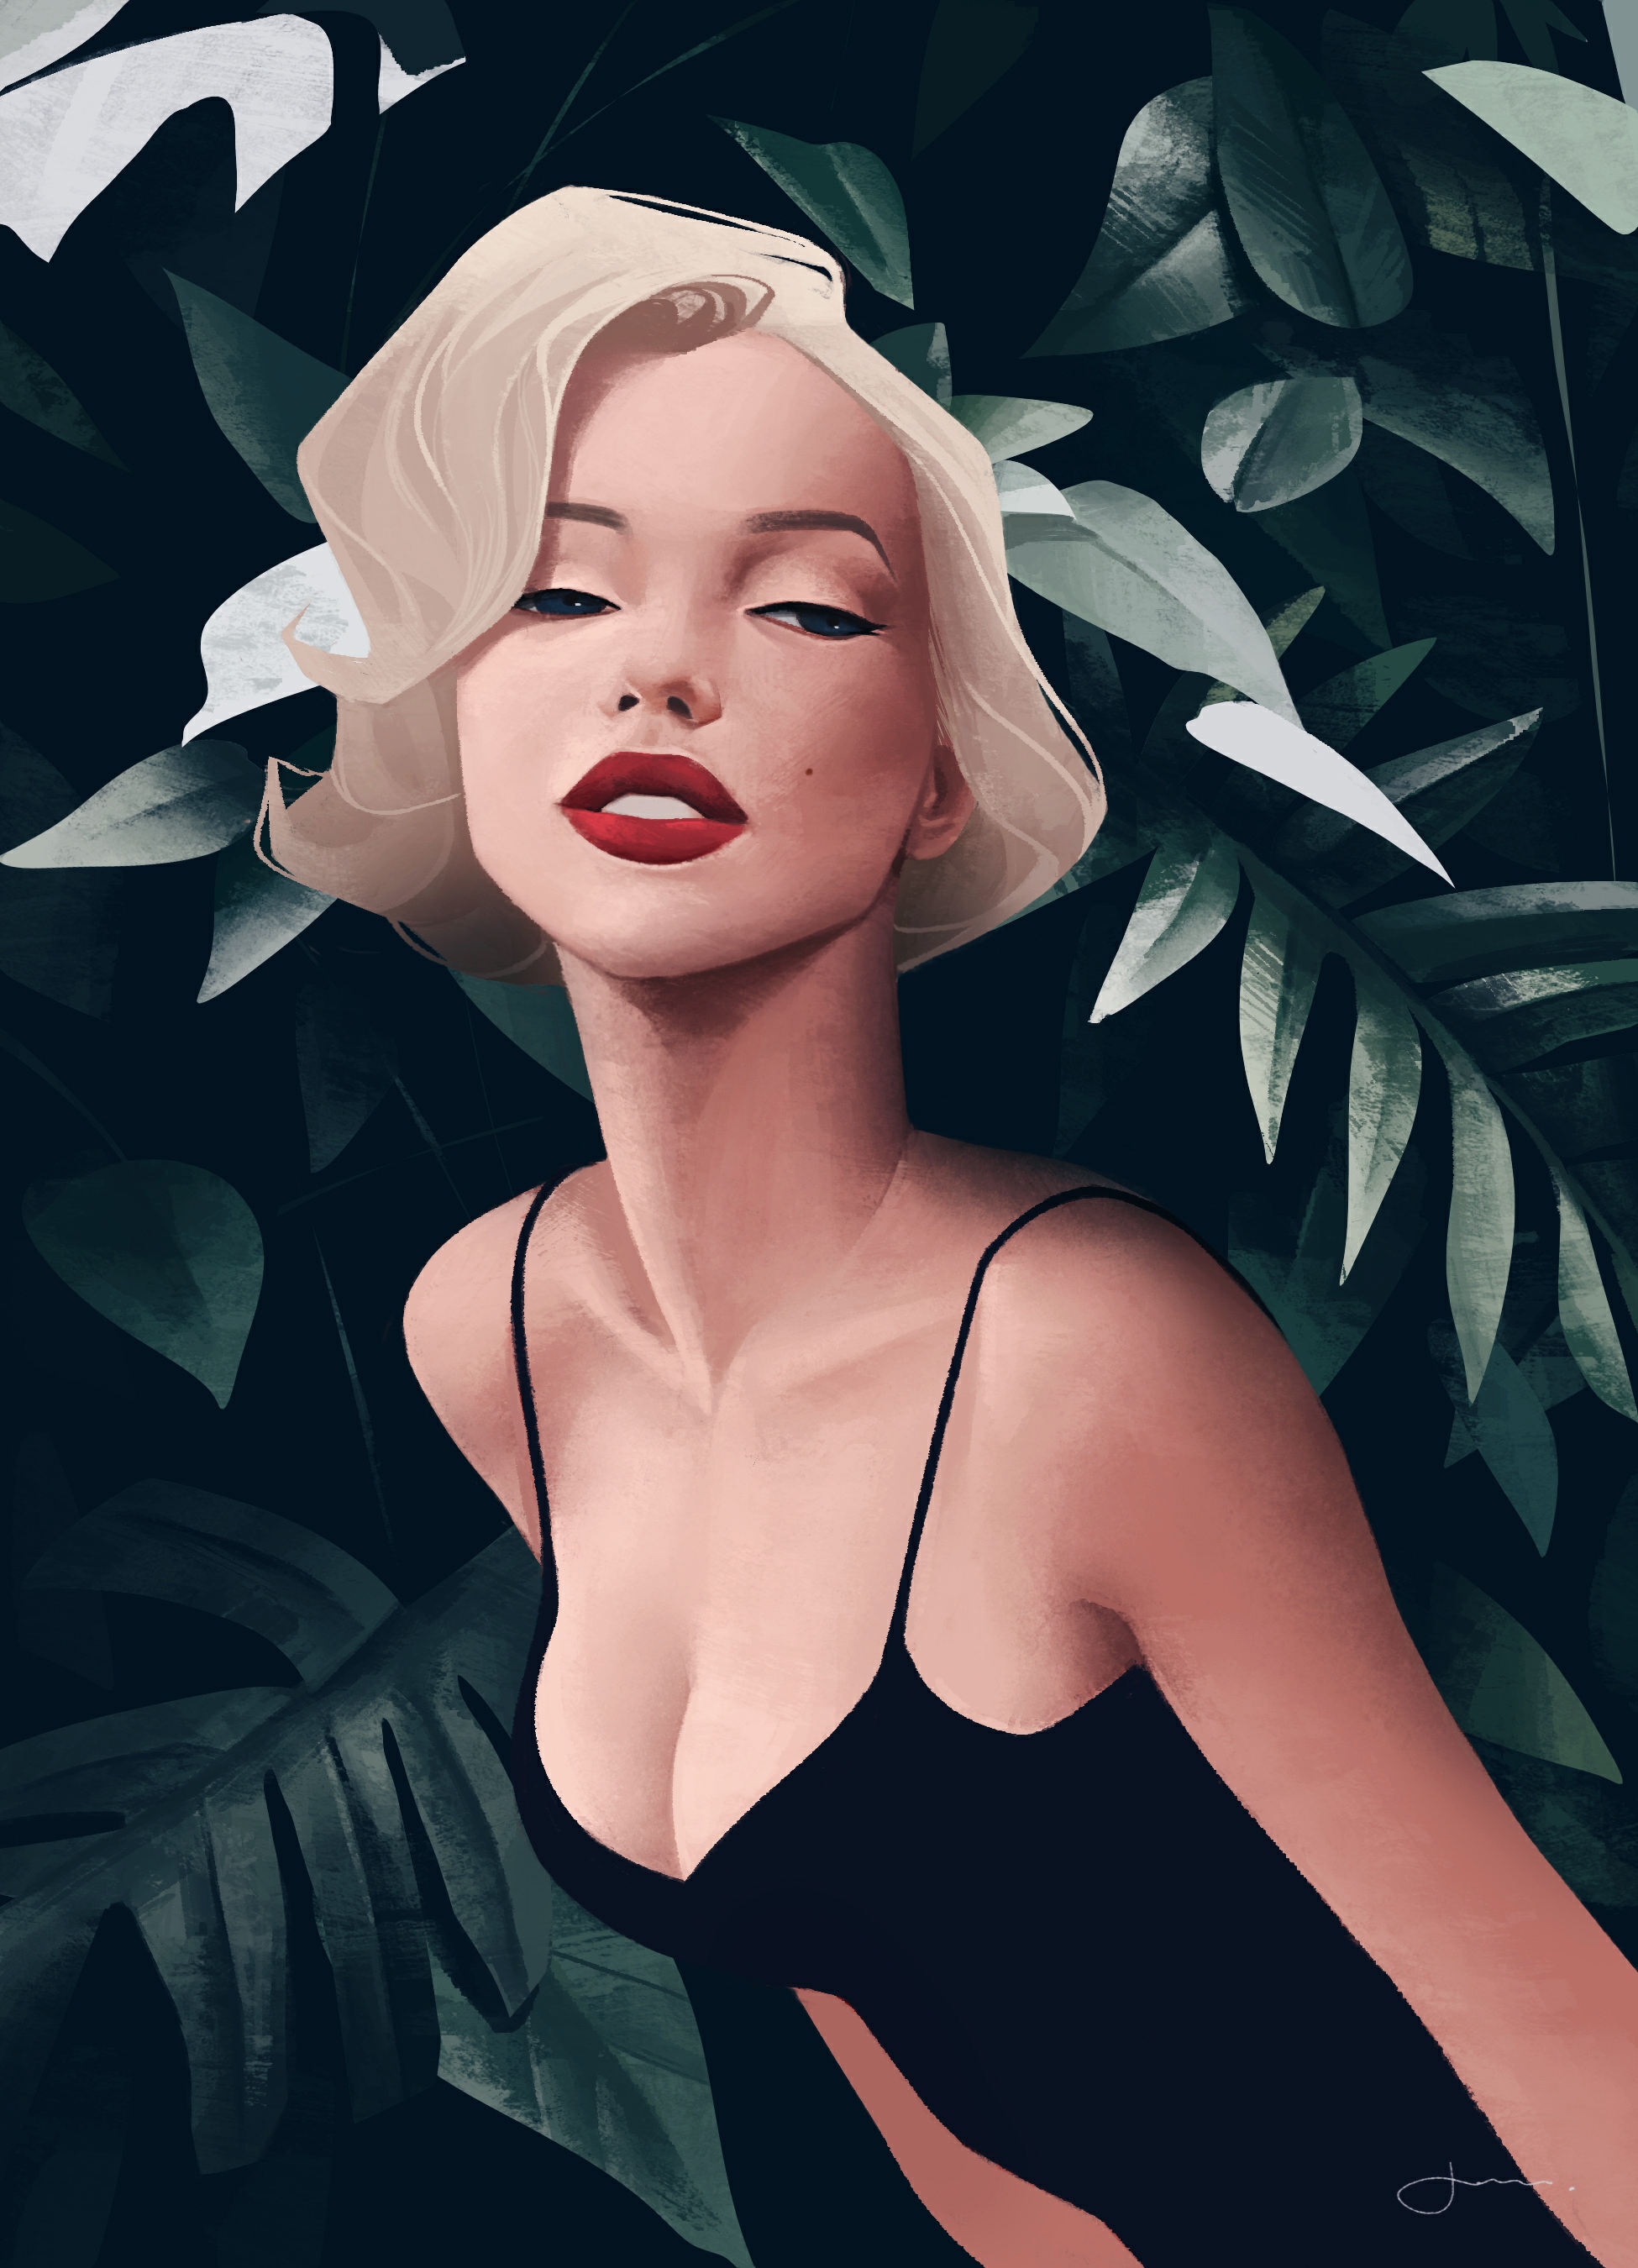 Artist Creates These Pretty and Quirky Portrait Illustrations - PlayJunkie